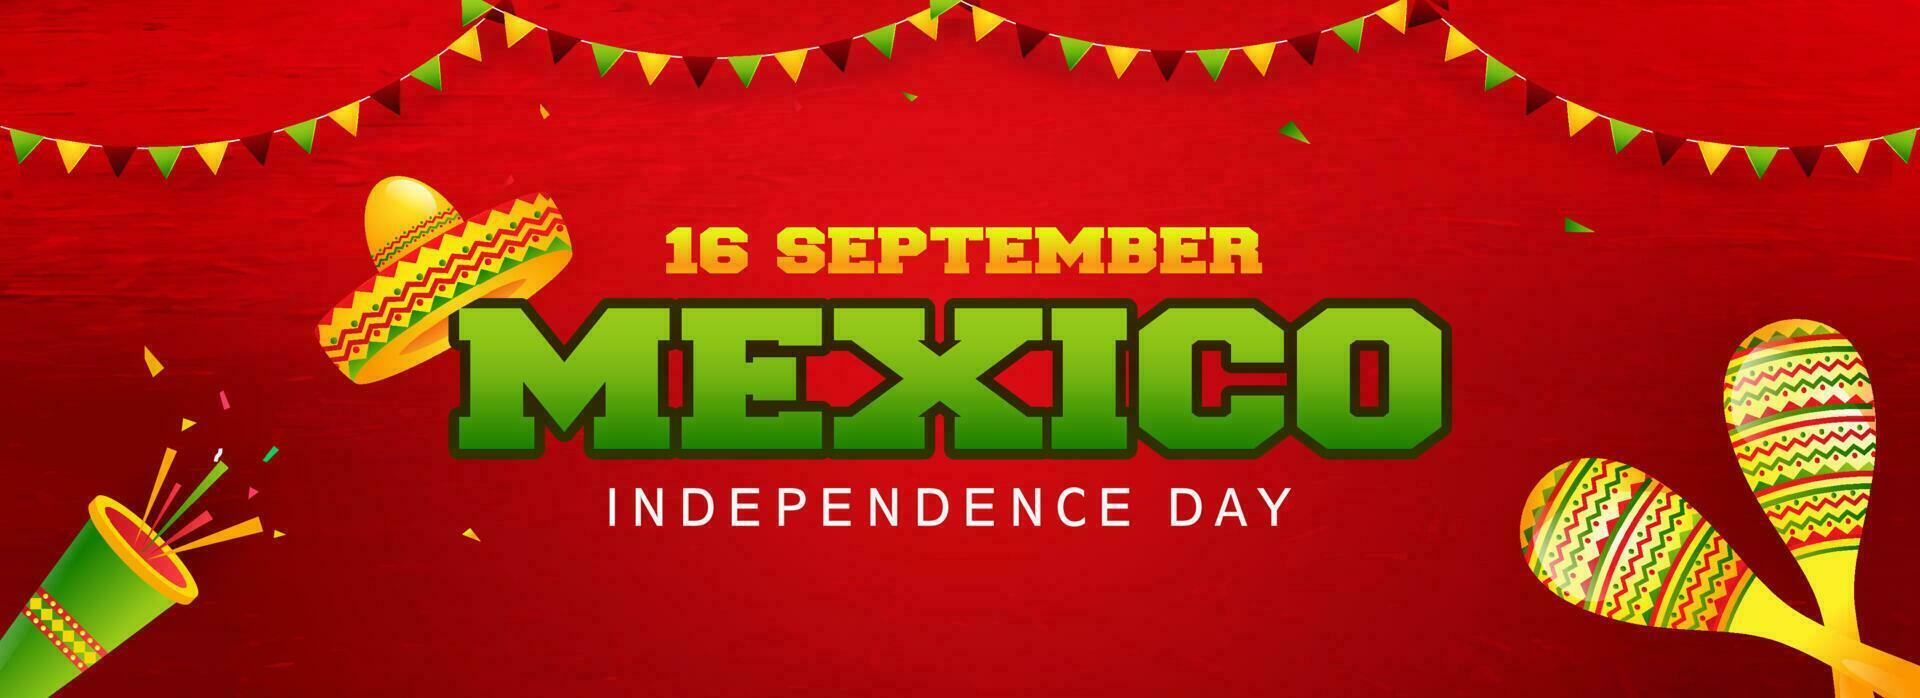 Website header or banner design with illustration of sombrero hat, maracas and party popper on red background for 16 September, Mexico Independence Day celebration. vector